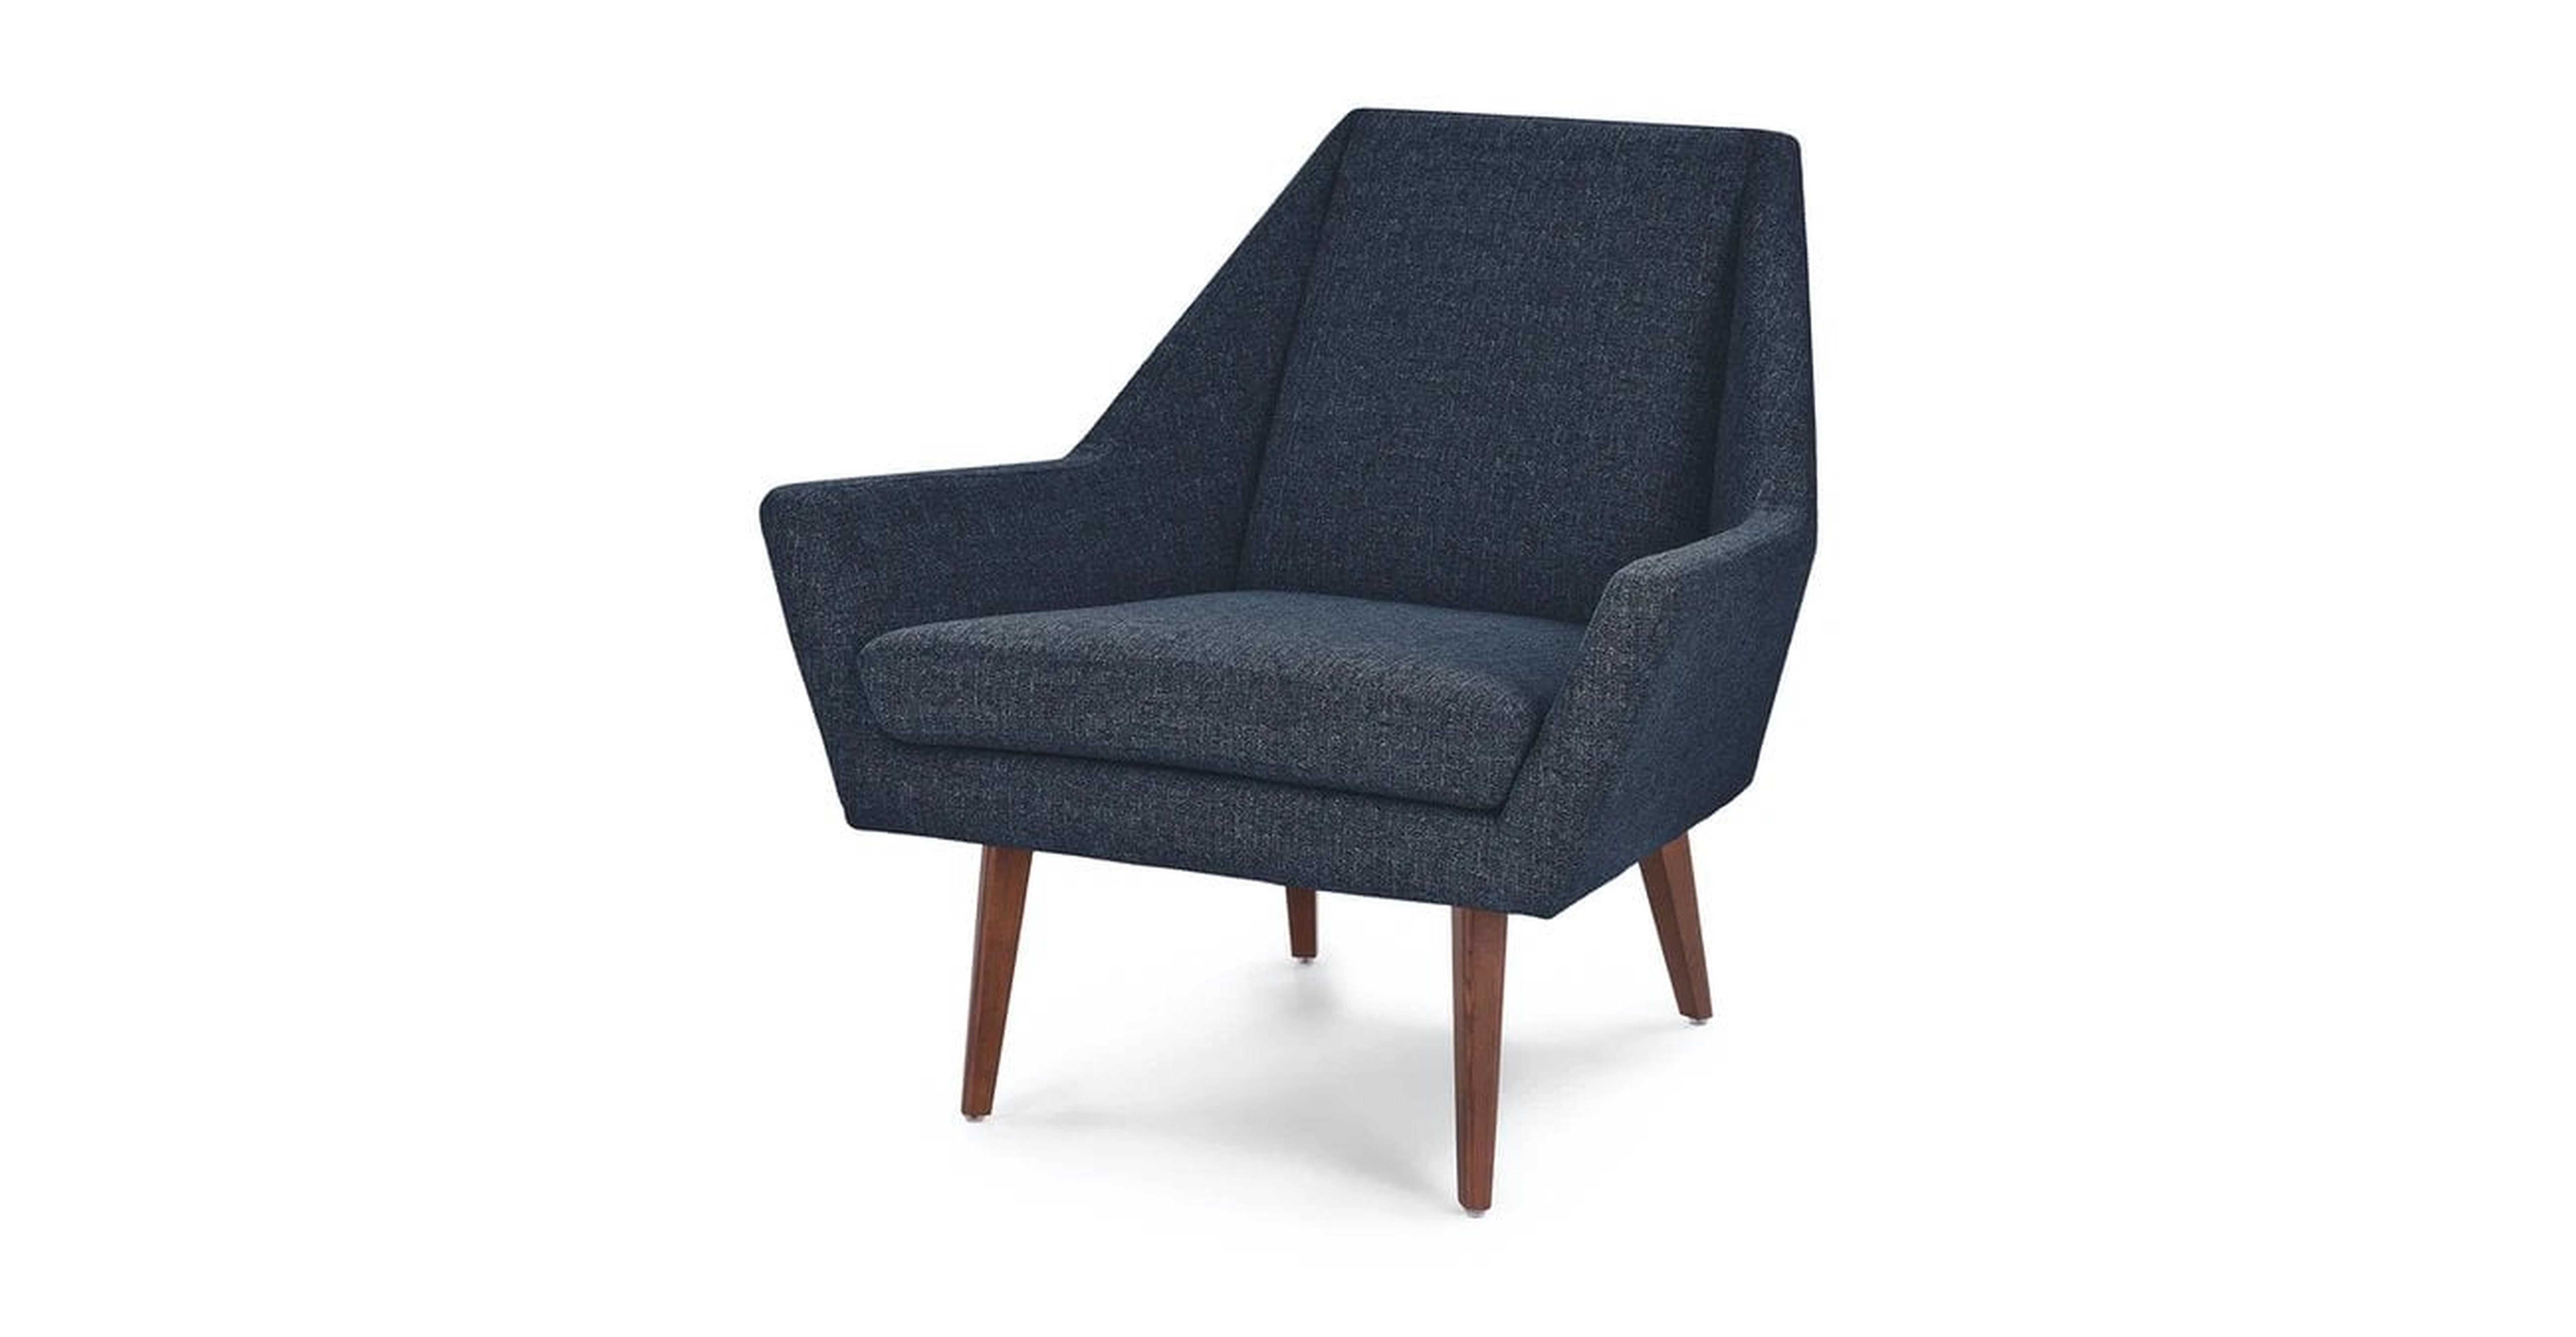 Angle Denim Blue Chair - Article